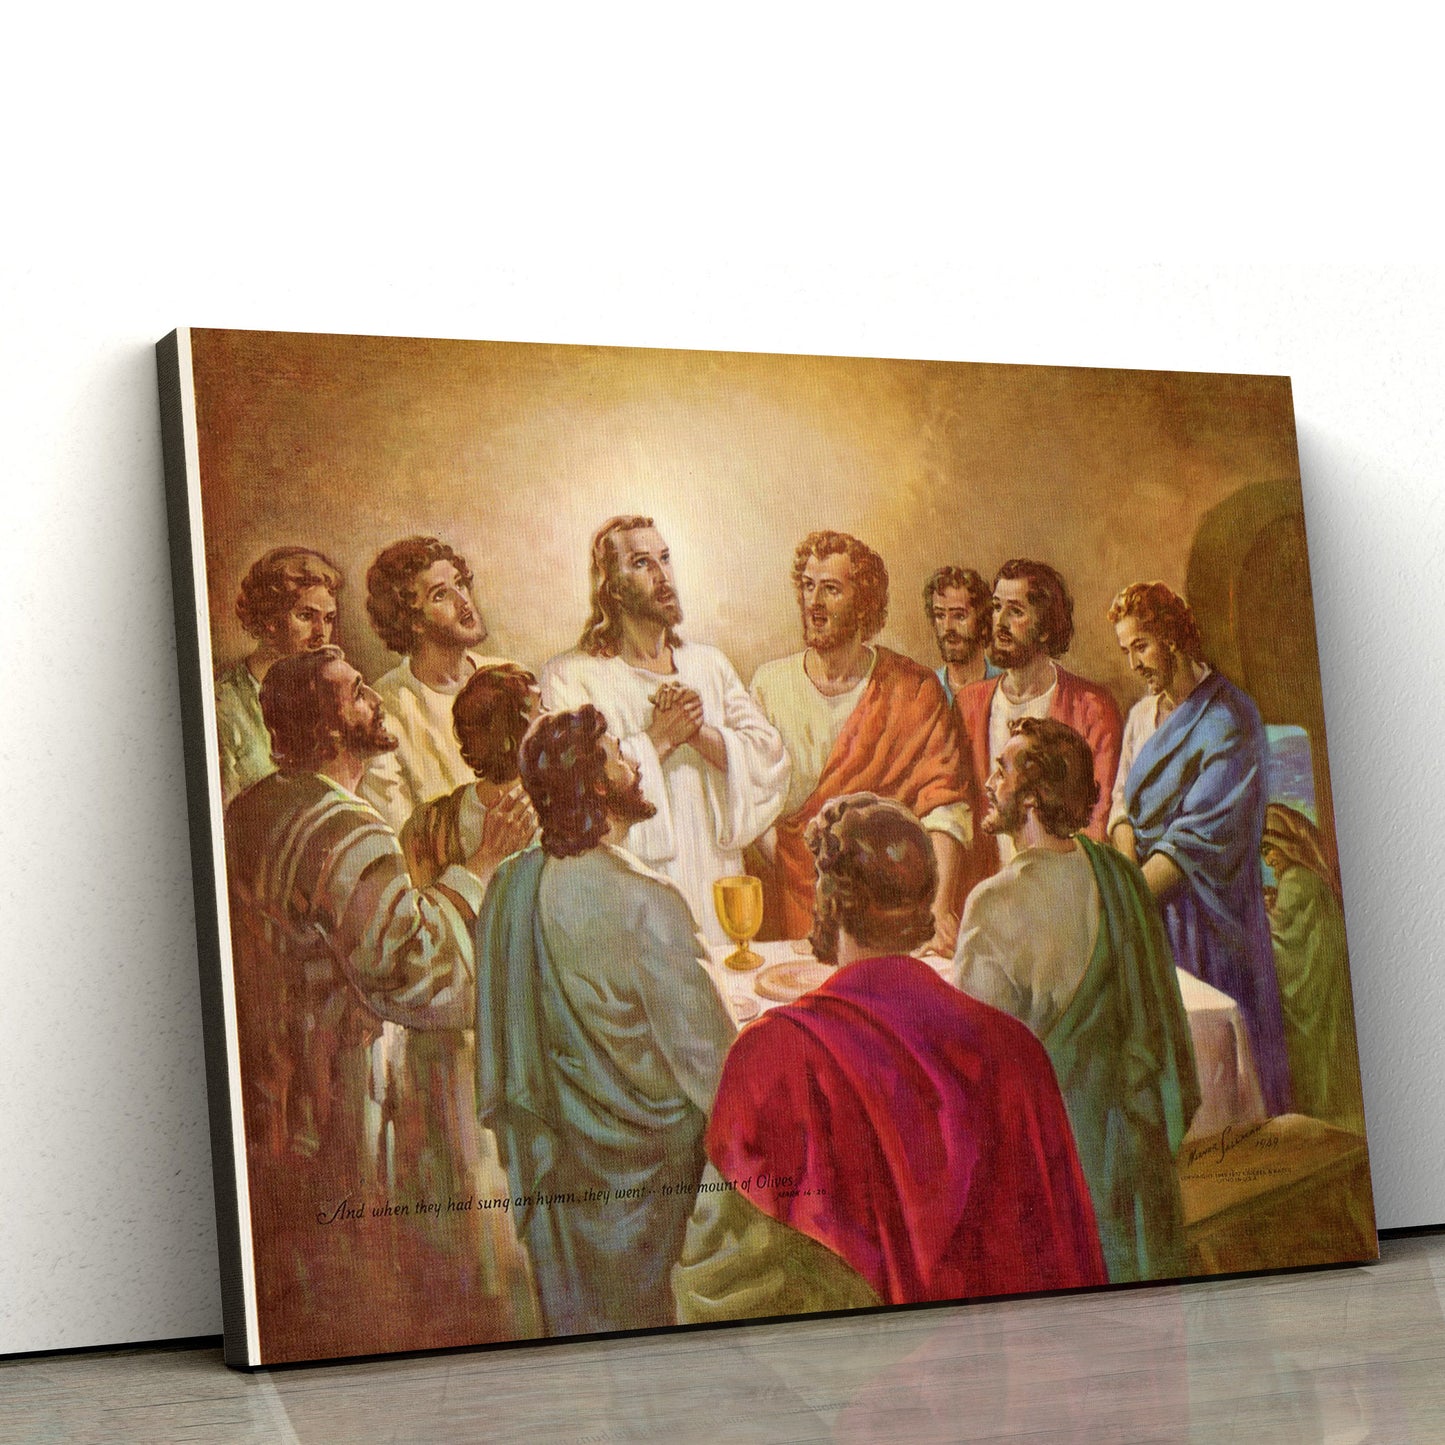 Jesus With Apostles Catholic Picture - Canvas Pictures - Jesus Canvas Art - Christian Wall Art